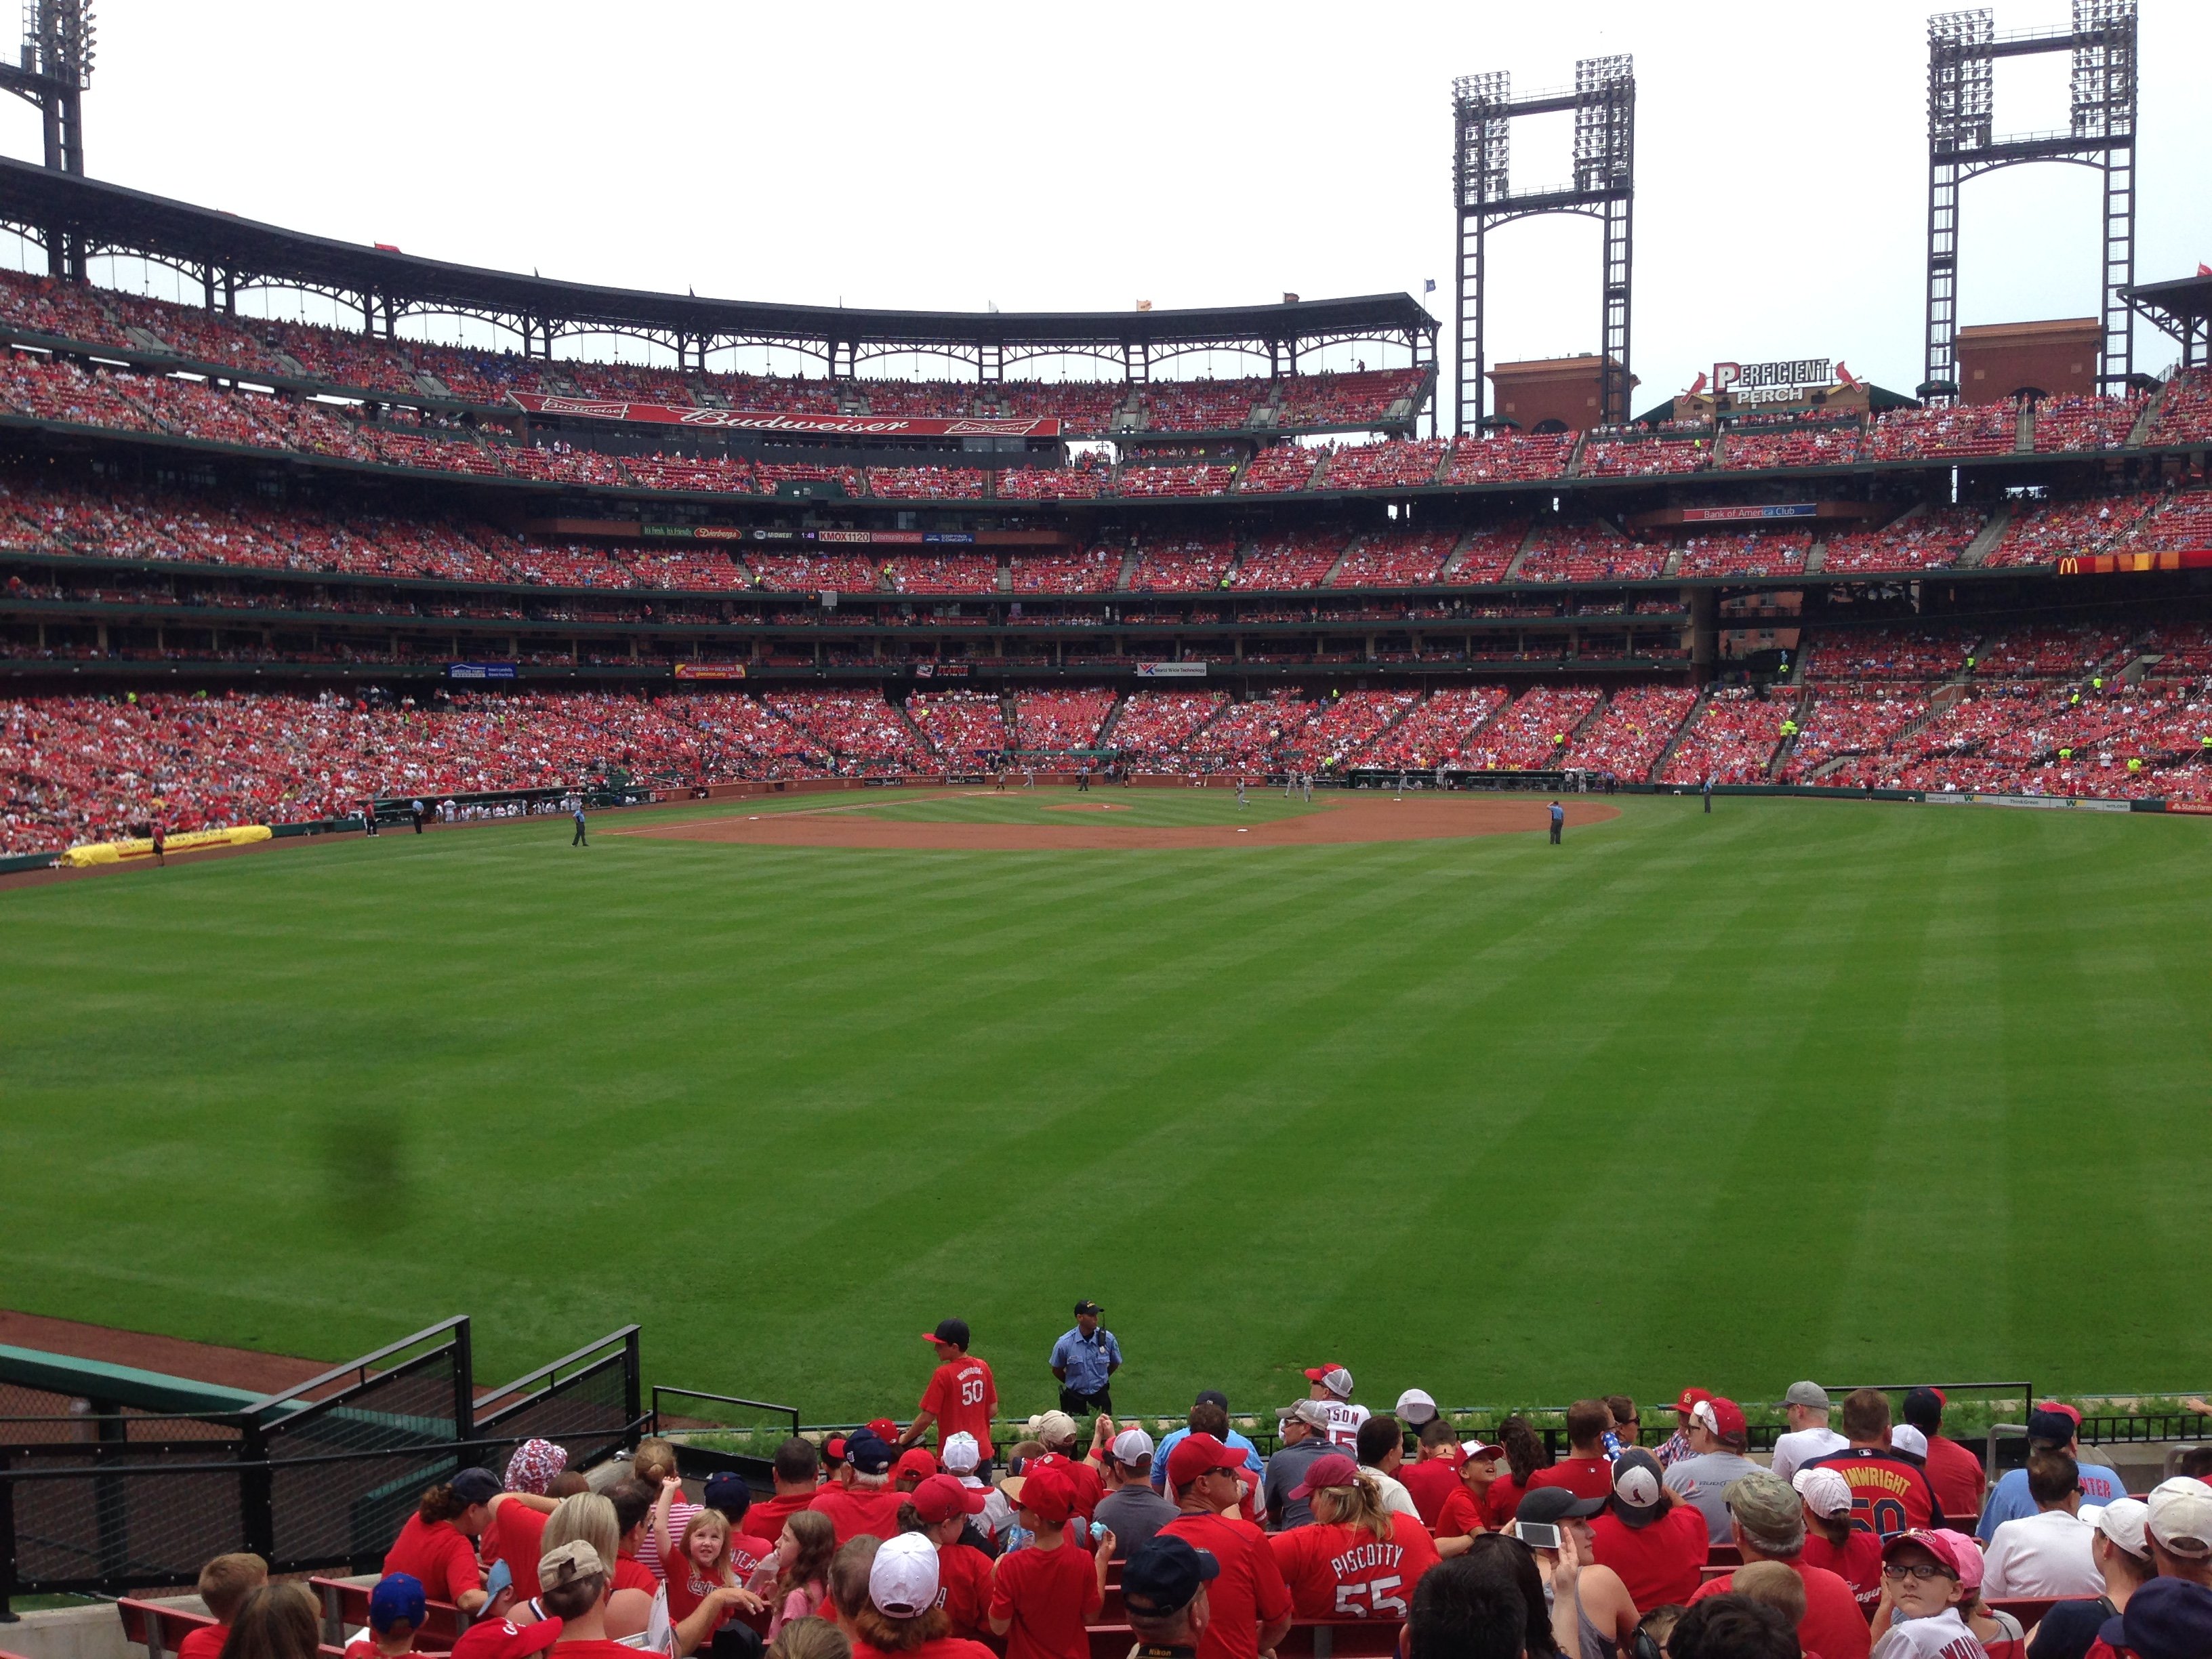 Busch Stadium rated among top sports venues